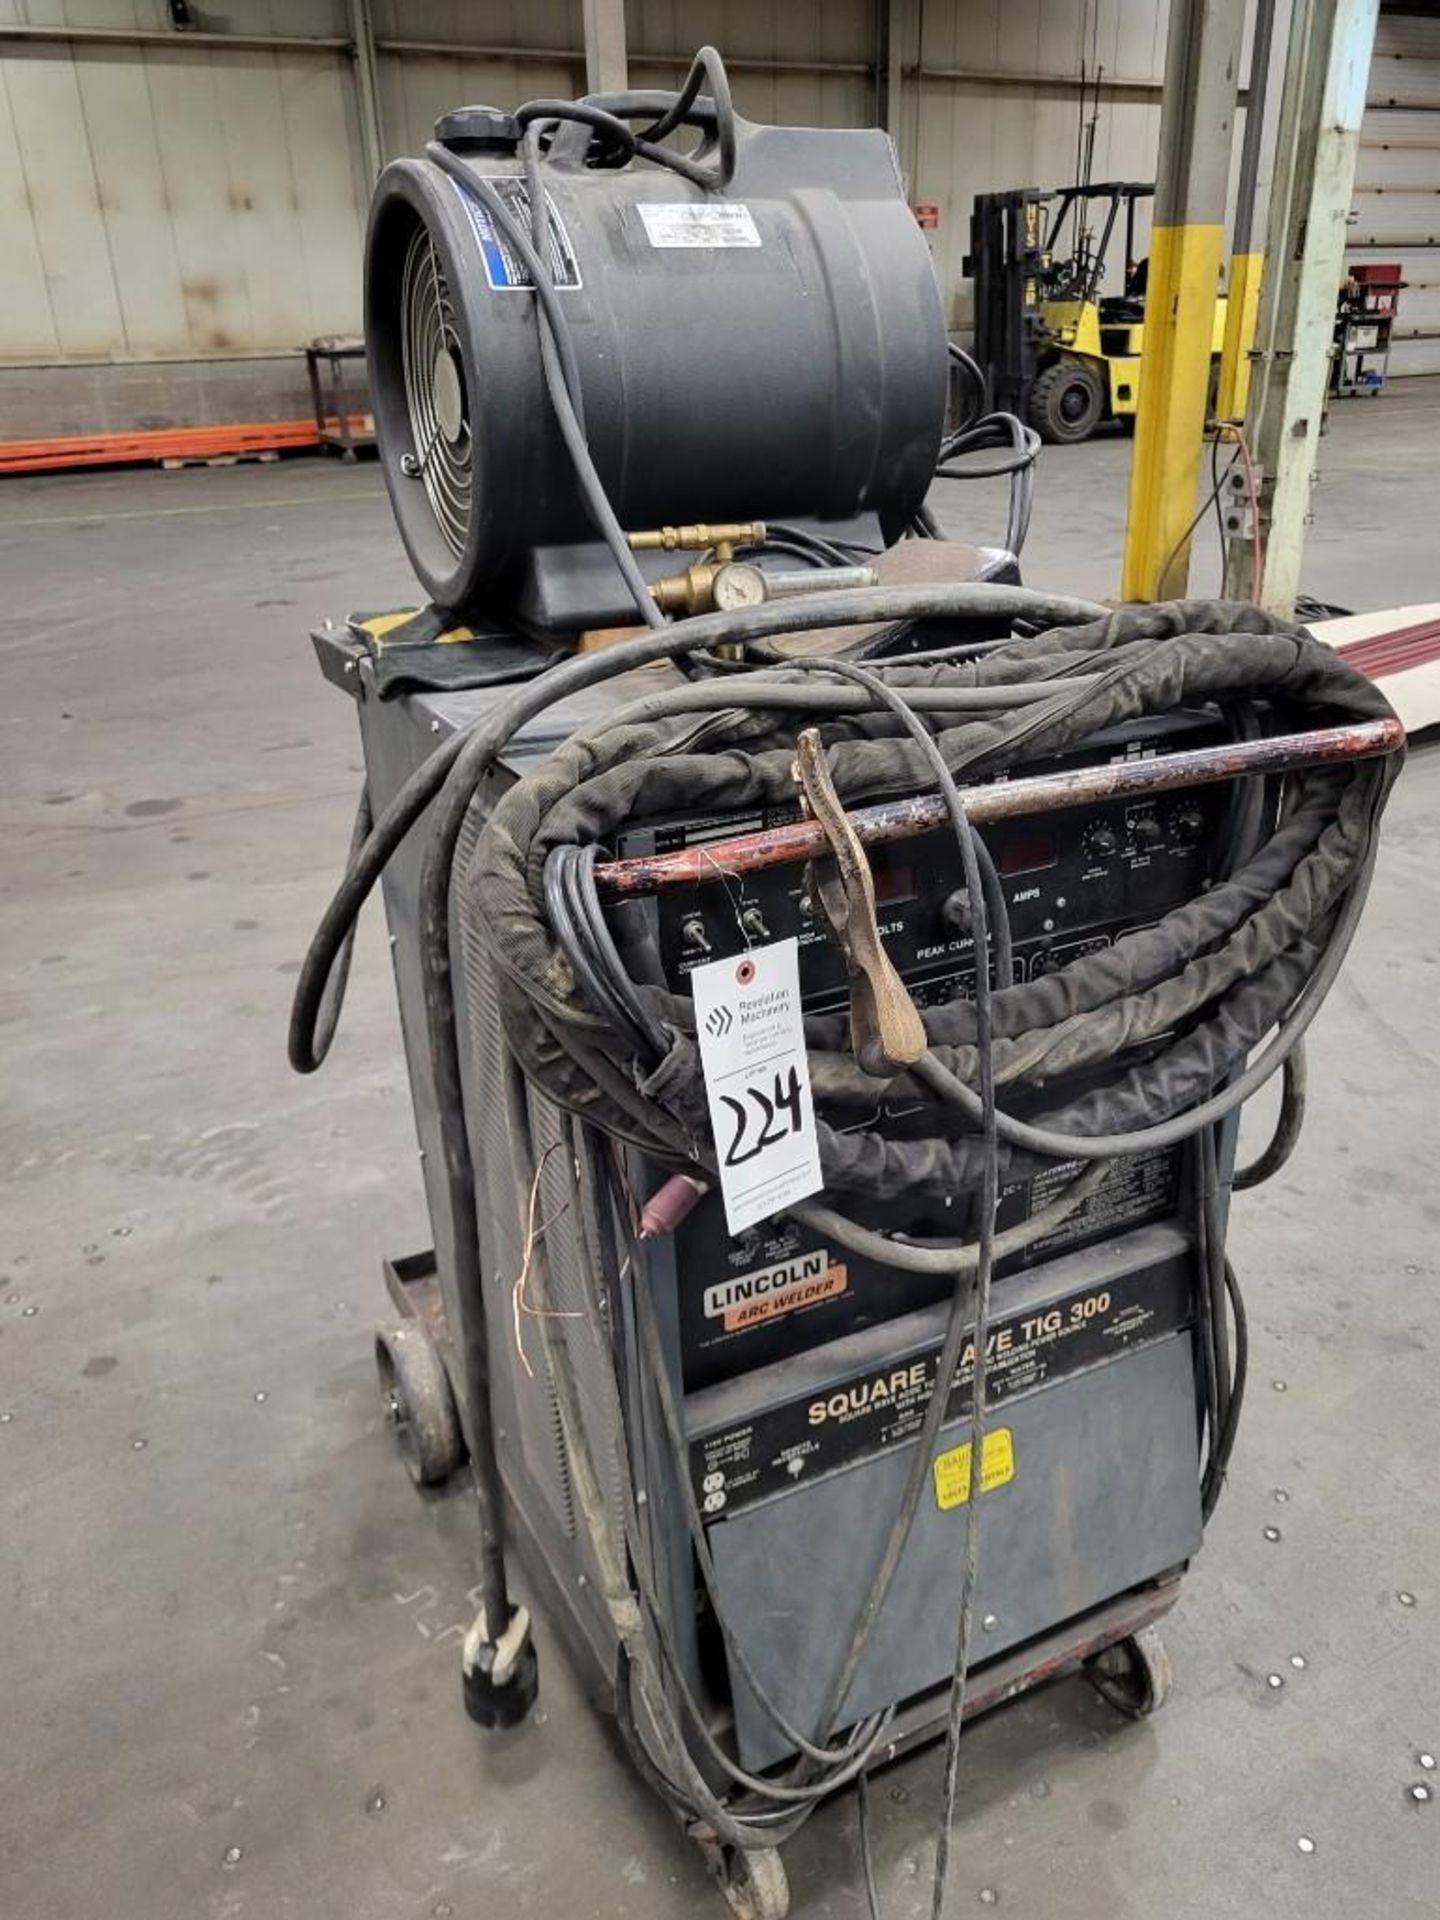 LINCOLN ELECTRIC SQUARE WAVE TIG 300 WELDER WITH MILLER COOLMATE 4